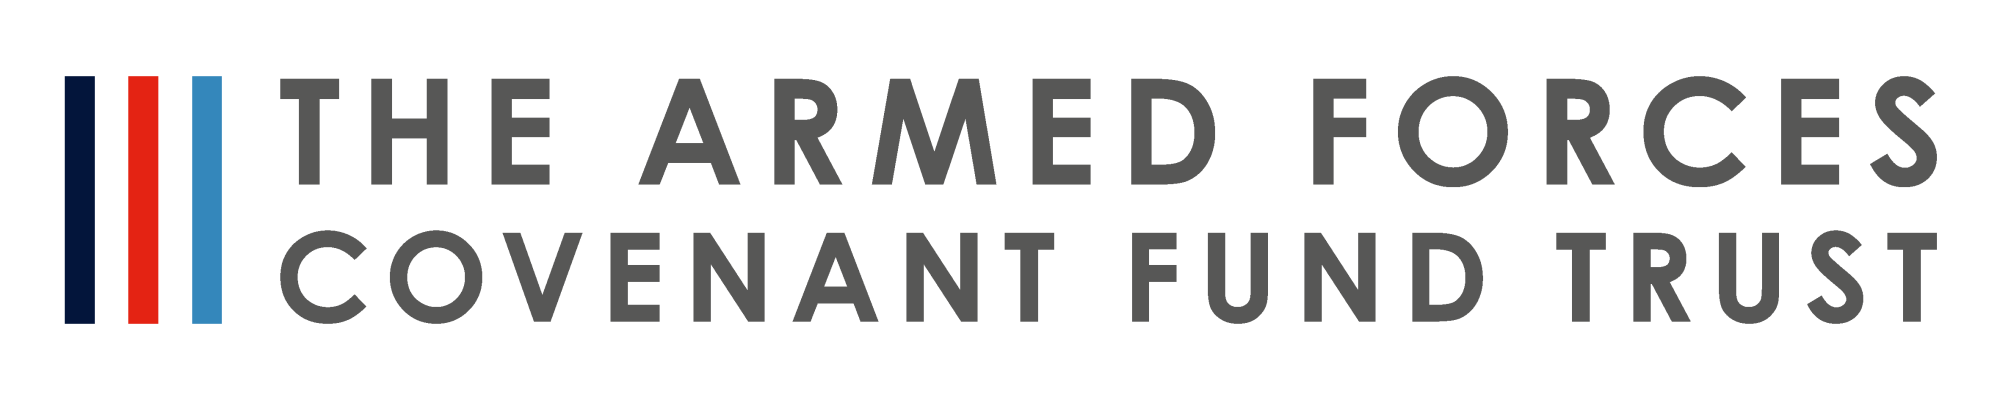 Armed Forces Covenant Trust Fund Logo